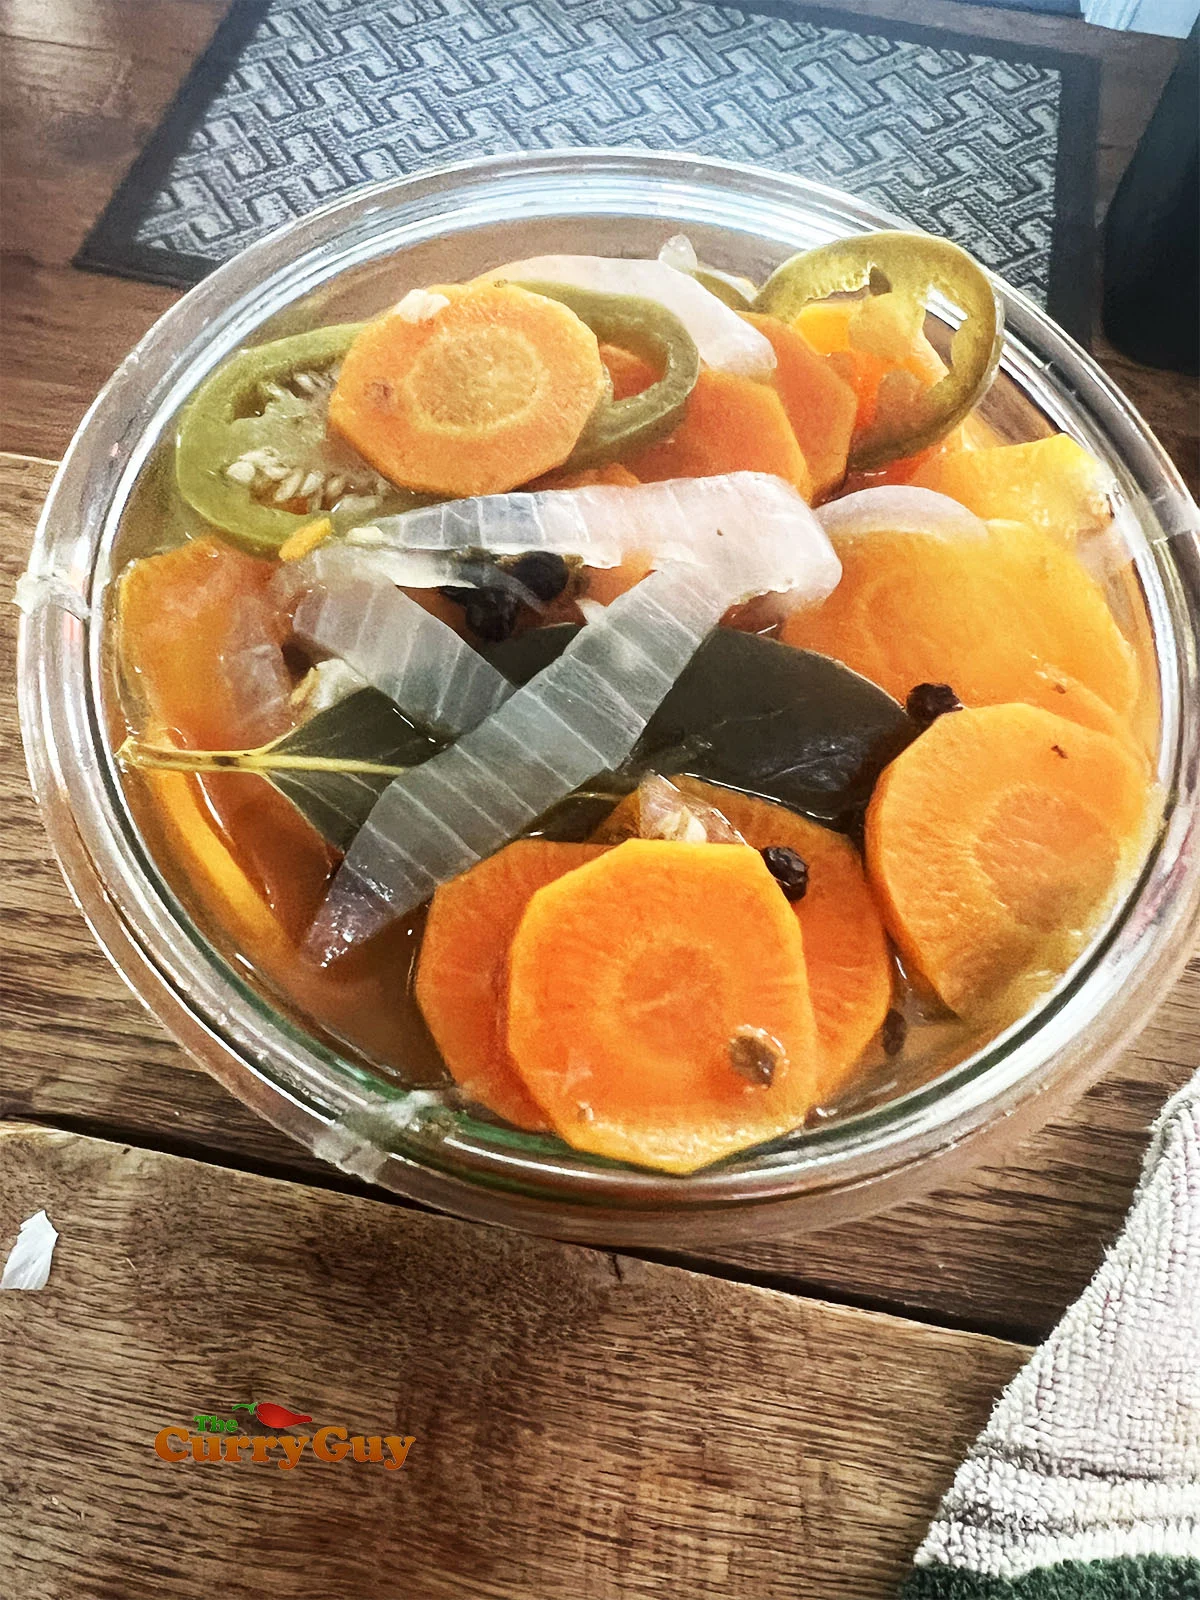 The carrot mixture in a pickling jar.